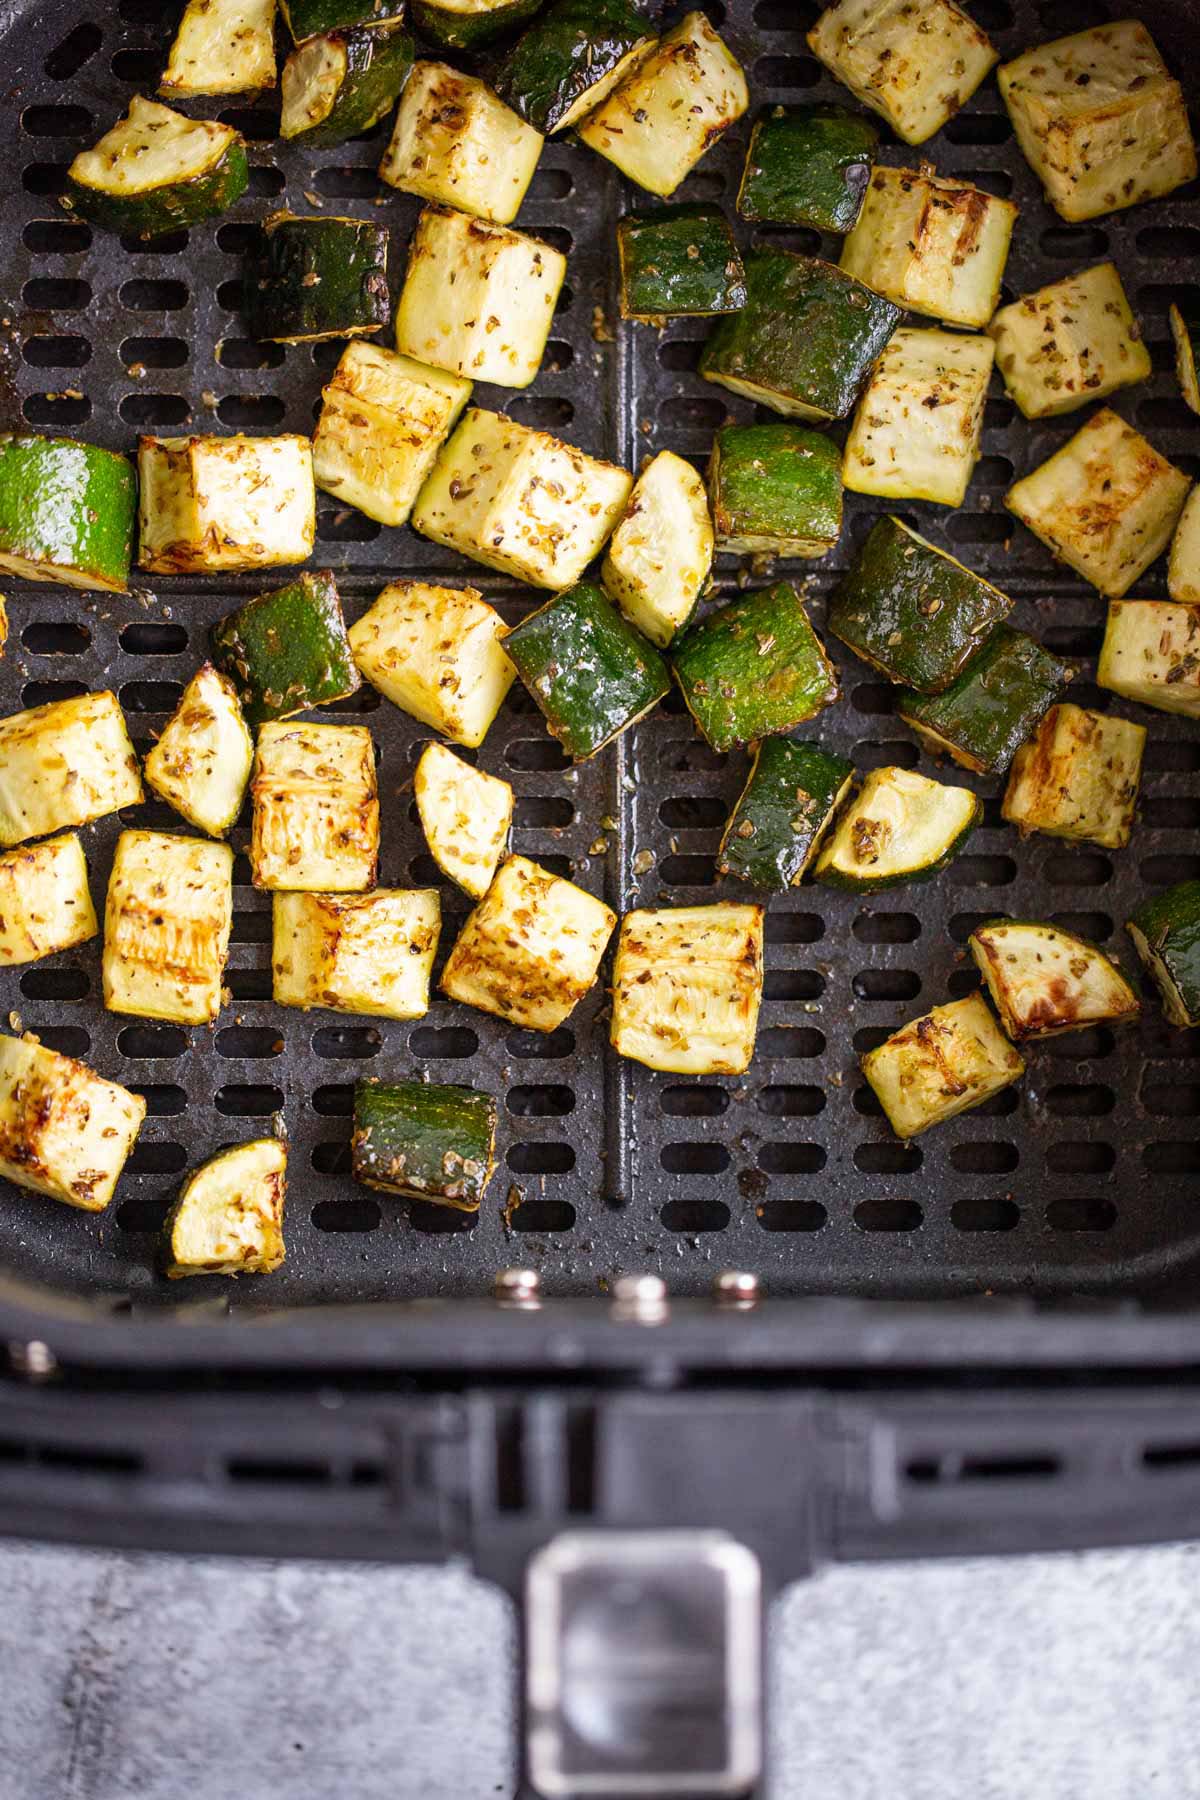 Roasted zucchini in air fryer.